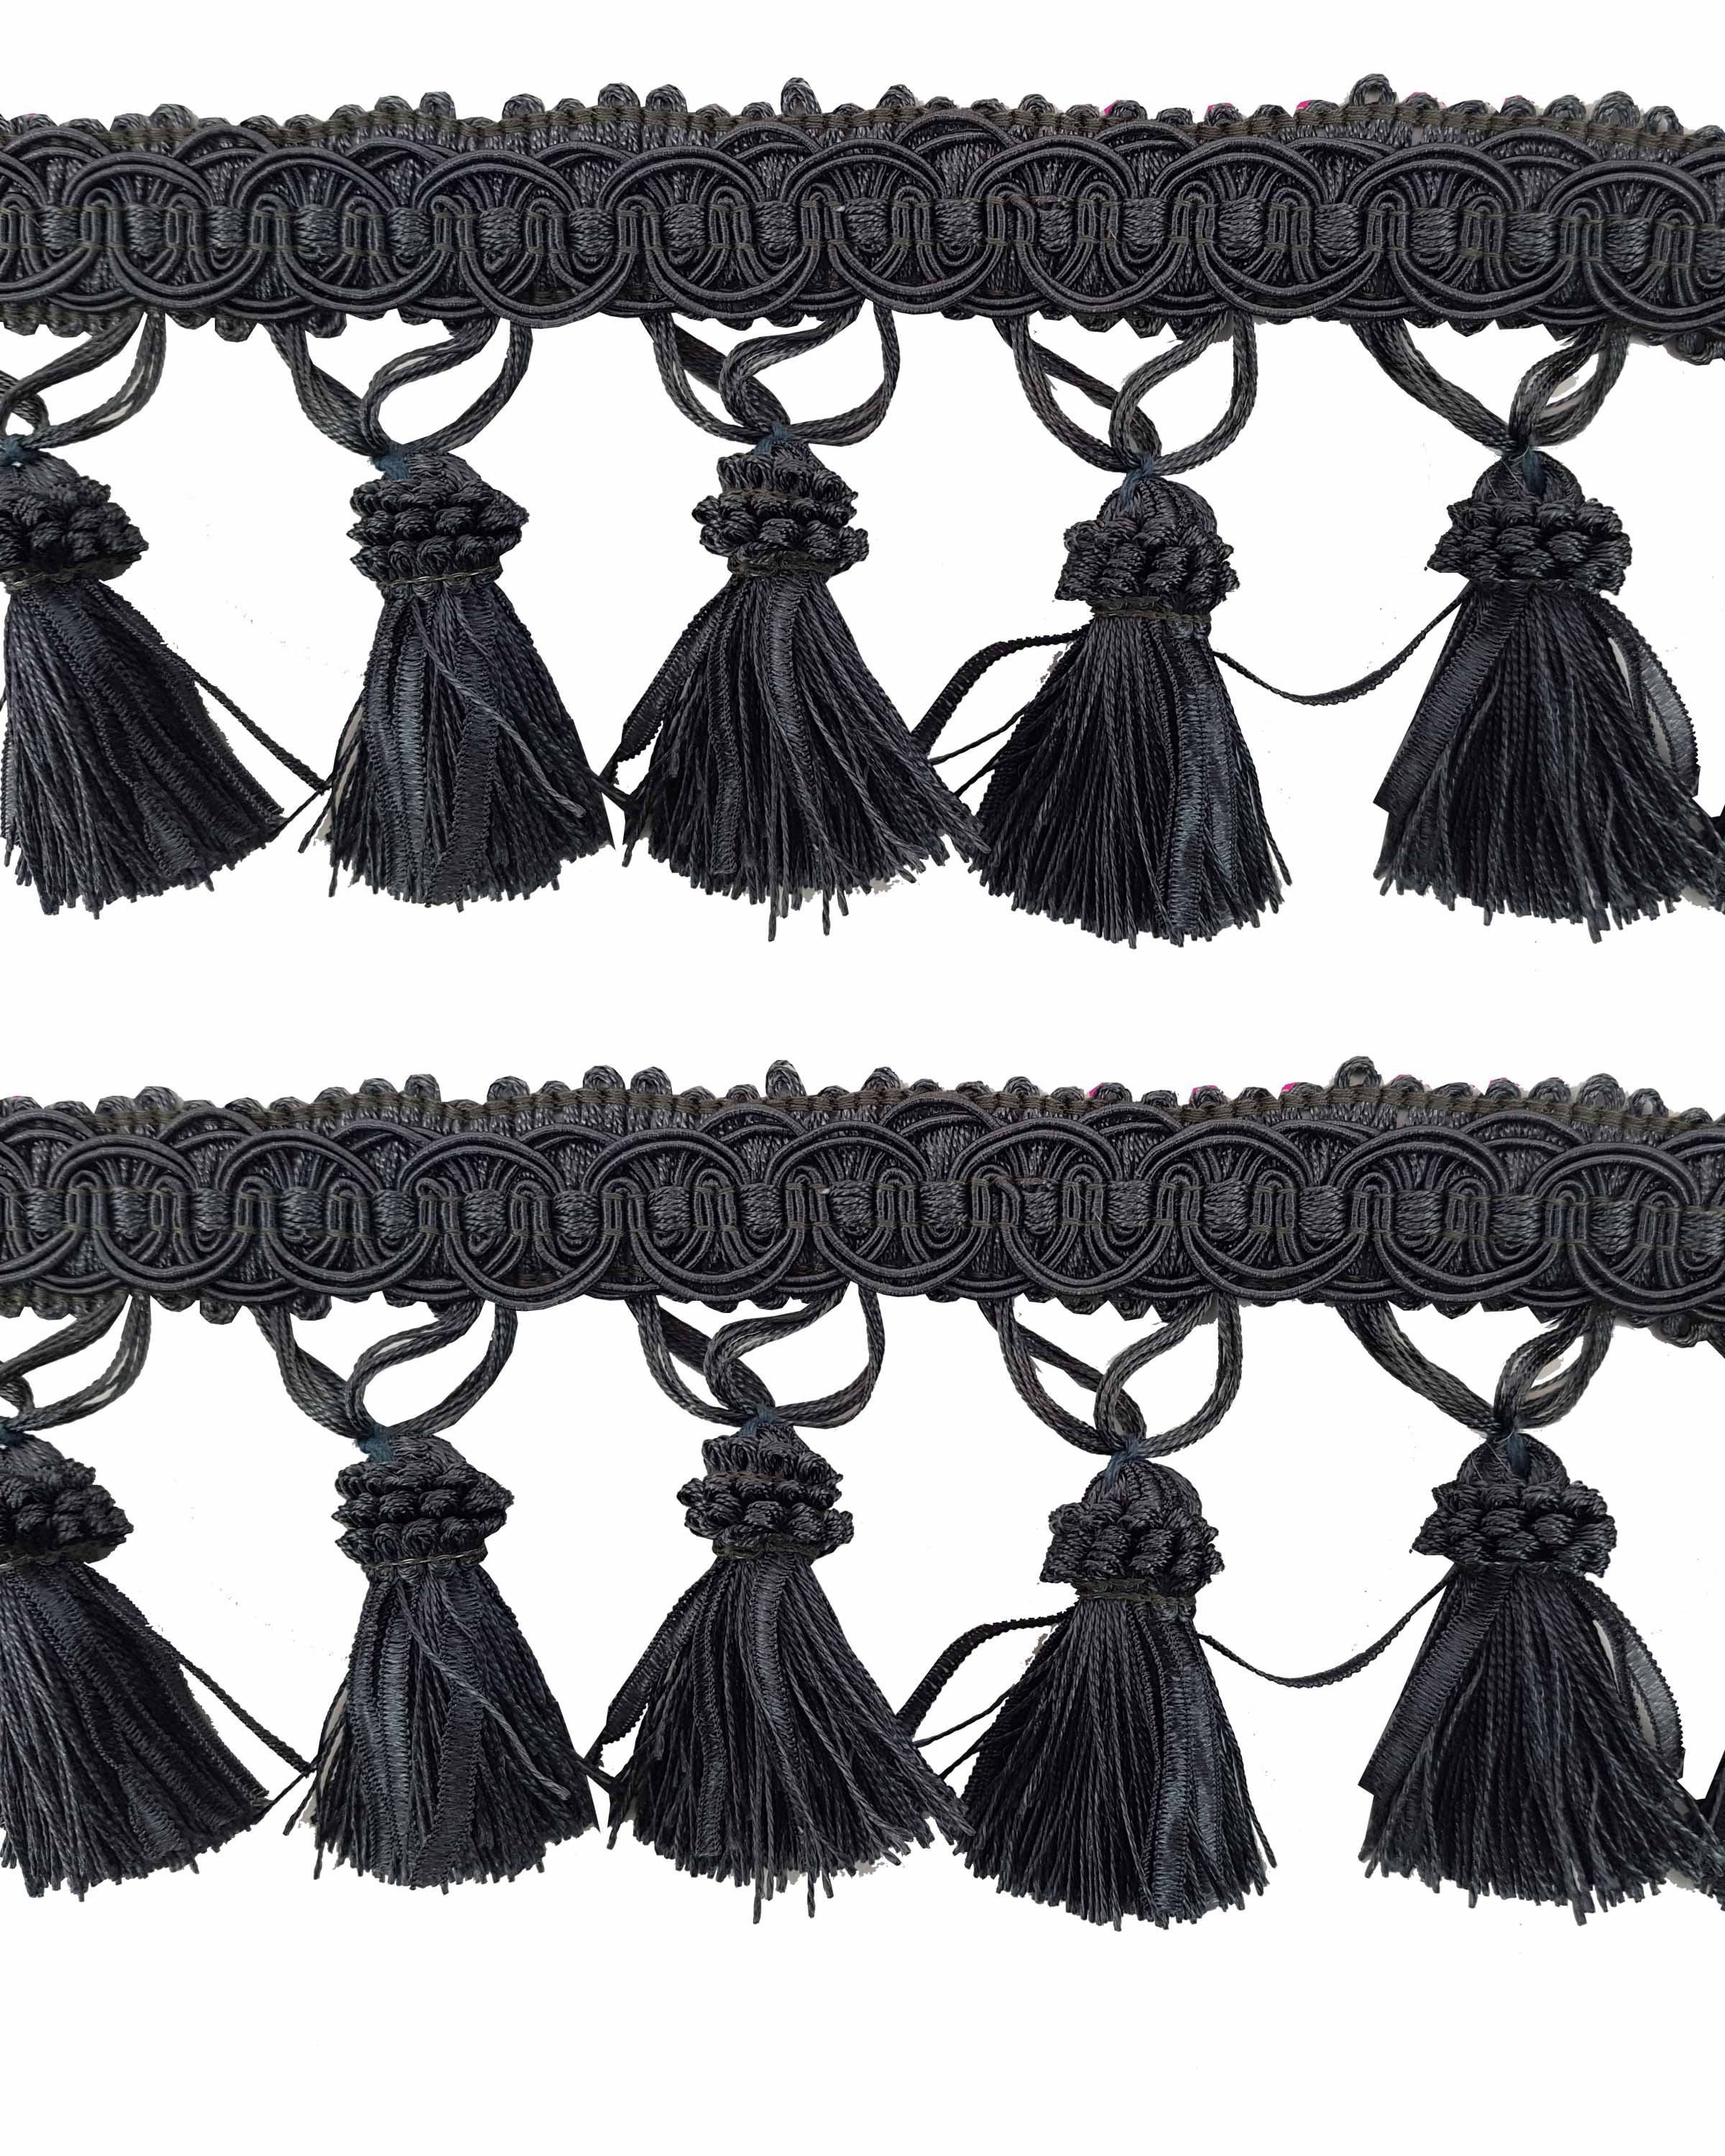 Fringe Tassels with Ribbons, Chunky Style - Charcoal Grey 90mm drop Price is per 5 metres